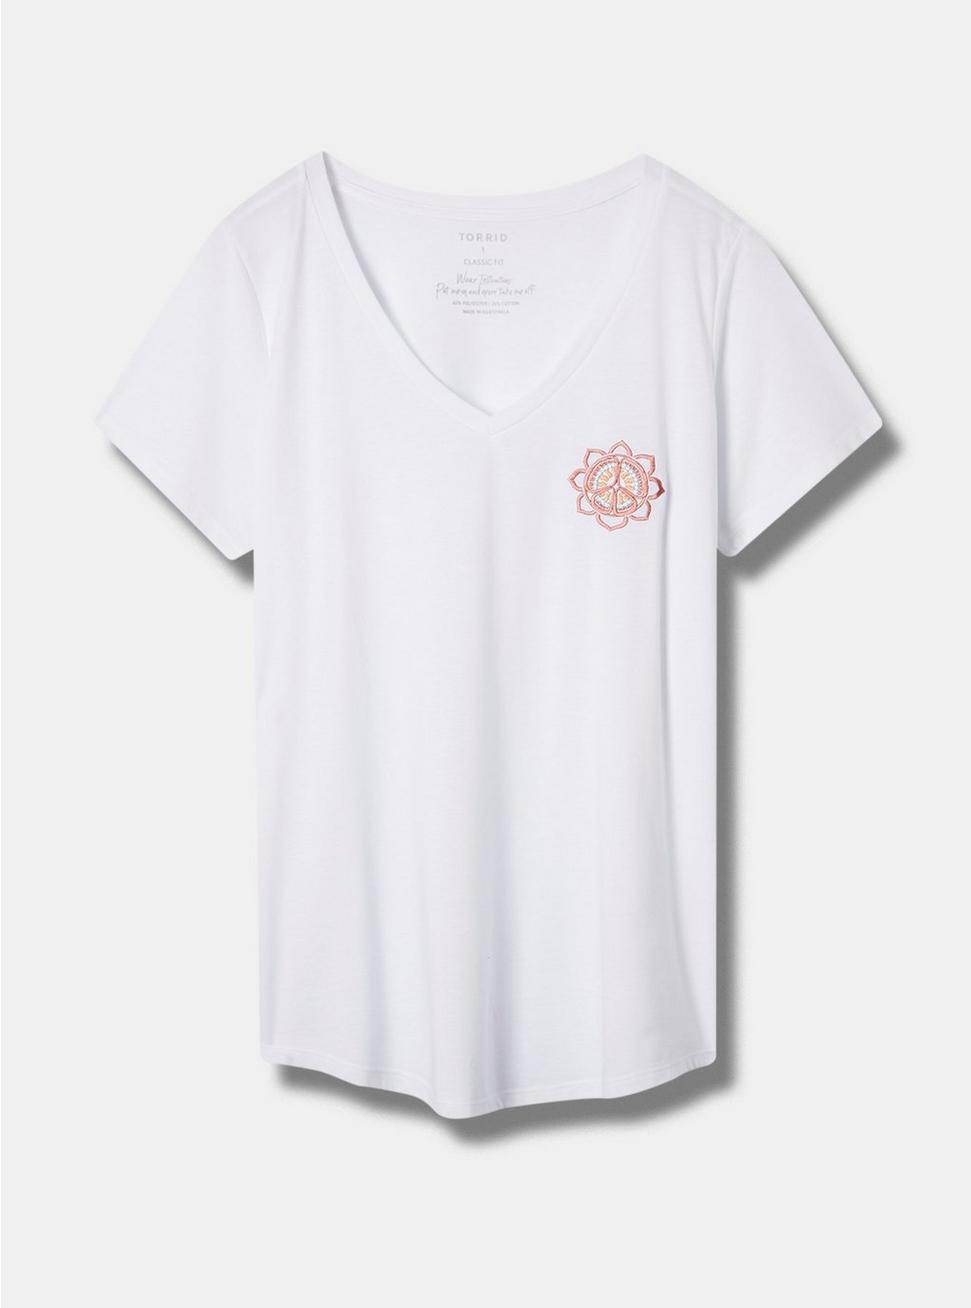 Hippy Face Girlfriend Classic Fit V-Neck Embroidered Tee, BRIGHT WHITE, hi-res